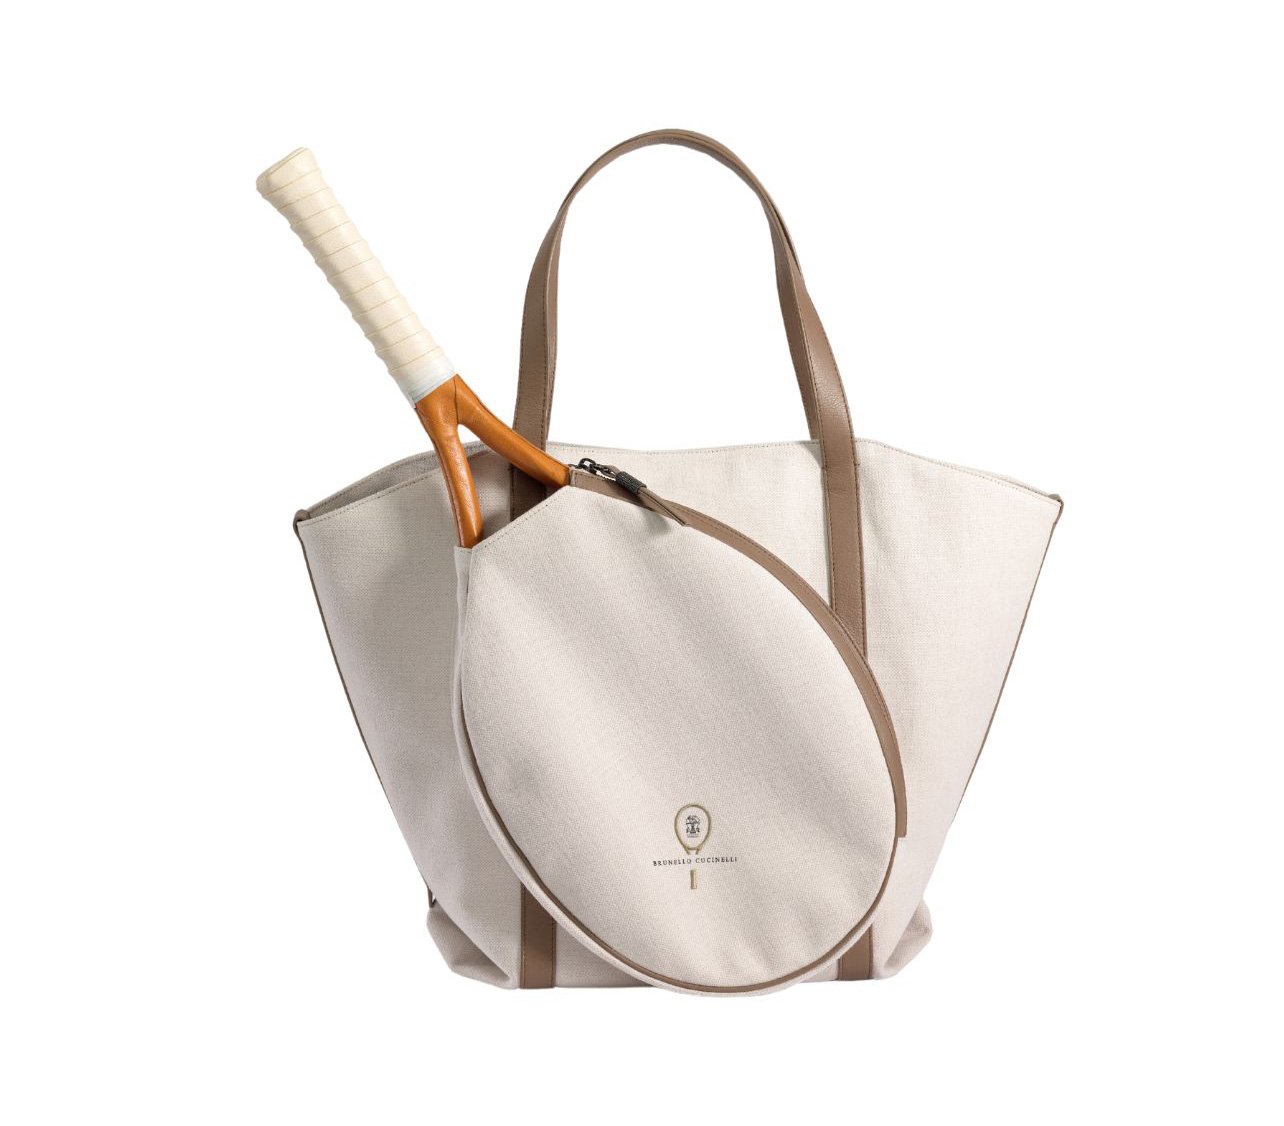 Brunello Cucinelli canvas and leather tennis tote bag with tennis racket